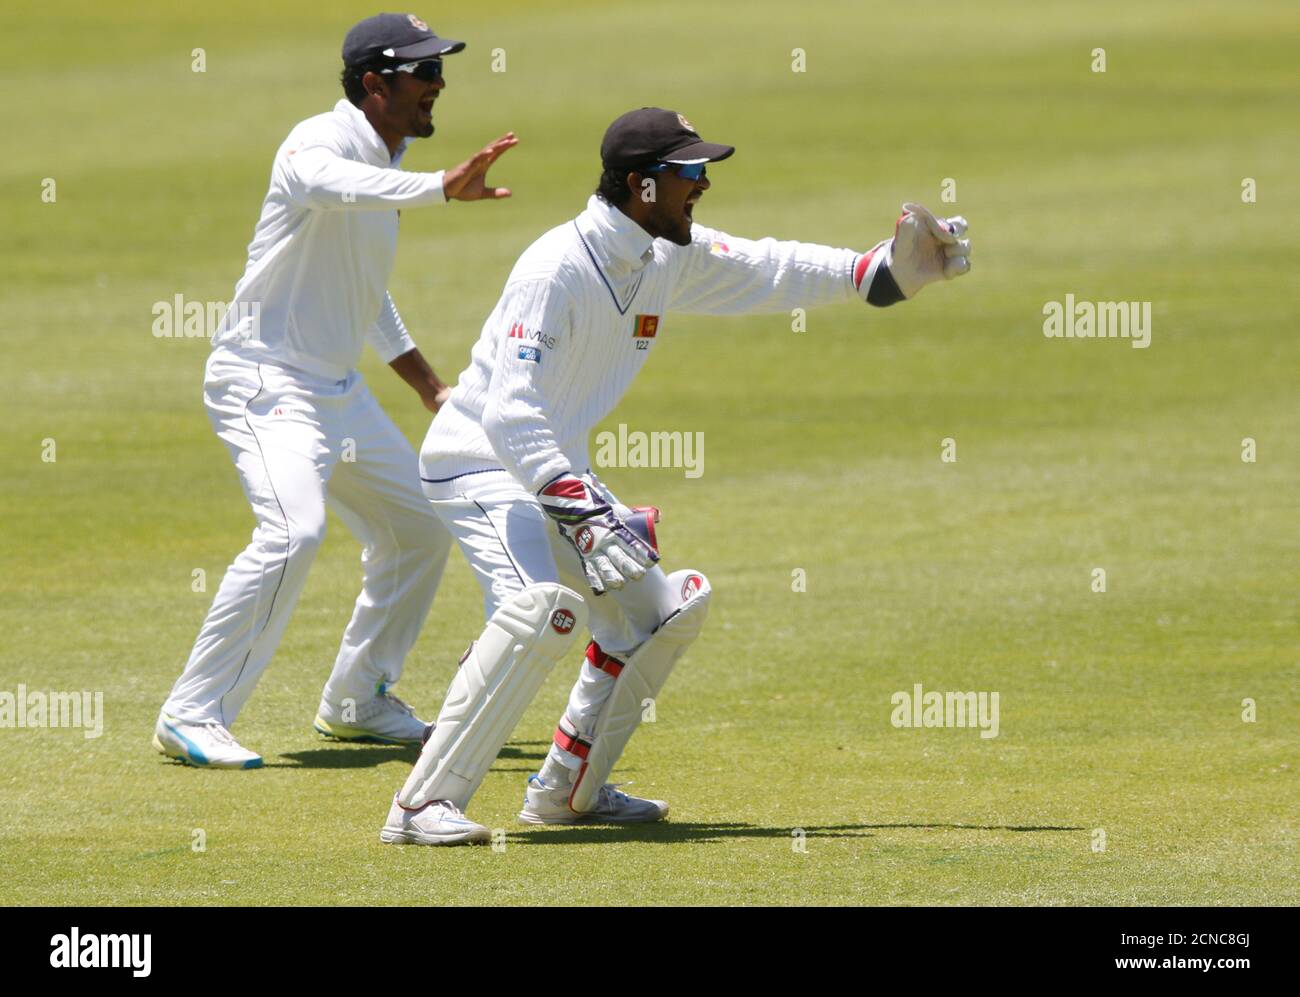 Cricket - Sri Lanka v South Africa - Second Test cricket match - Newlands Stadium, Cape Town, South Africa - 04/01/2017. Sri Lanka's Dinesh Chandimal celebrates as the wicket of South Africa's JP Duminy falls. REUTERS/Mike Hutchings Stock Photo